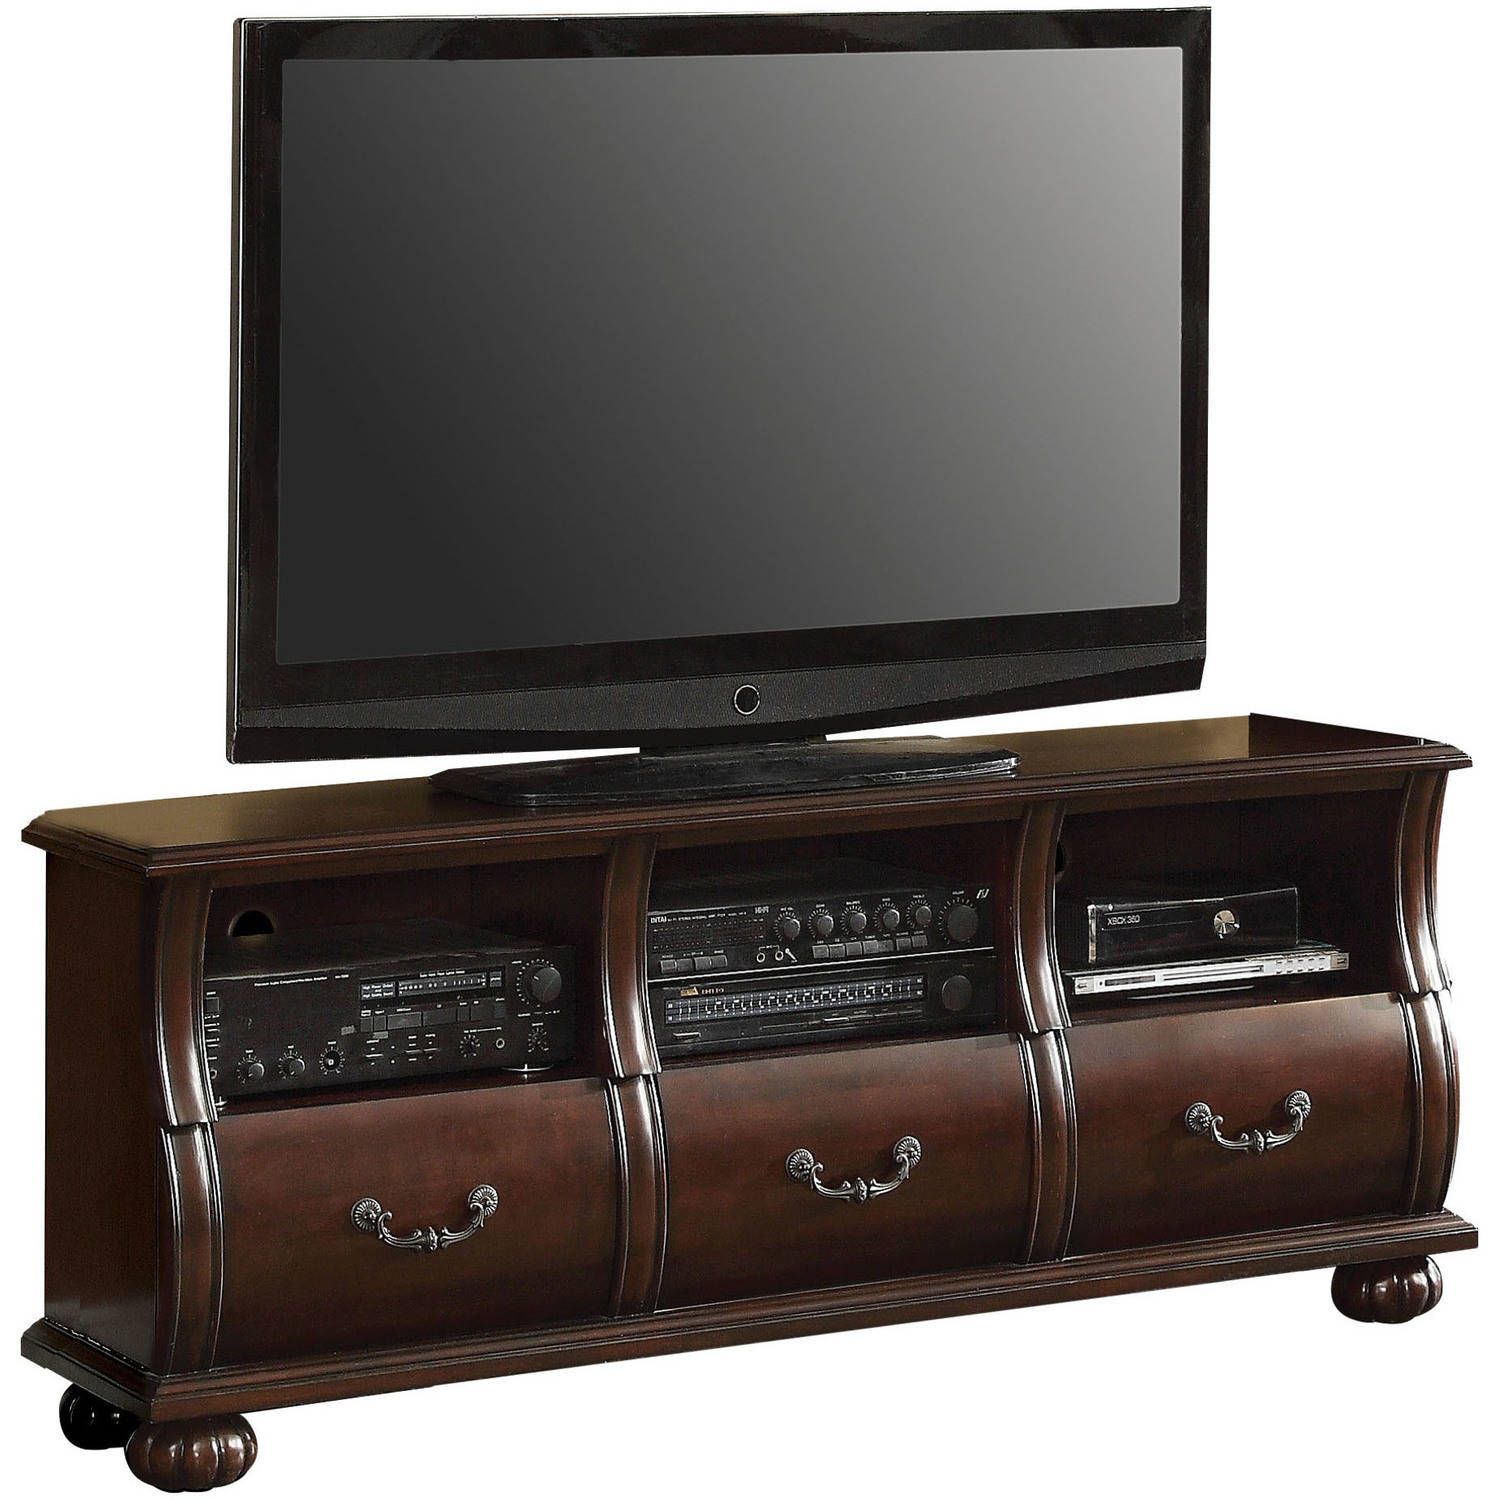 Acme Faysnow Dark Cherry Tv Stand For Flat Screen Tvs Up Throughout Spellman Tv Stands For Tvs Up To 55" (View 14 of 15)